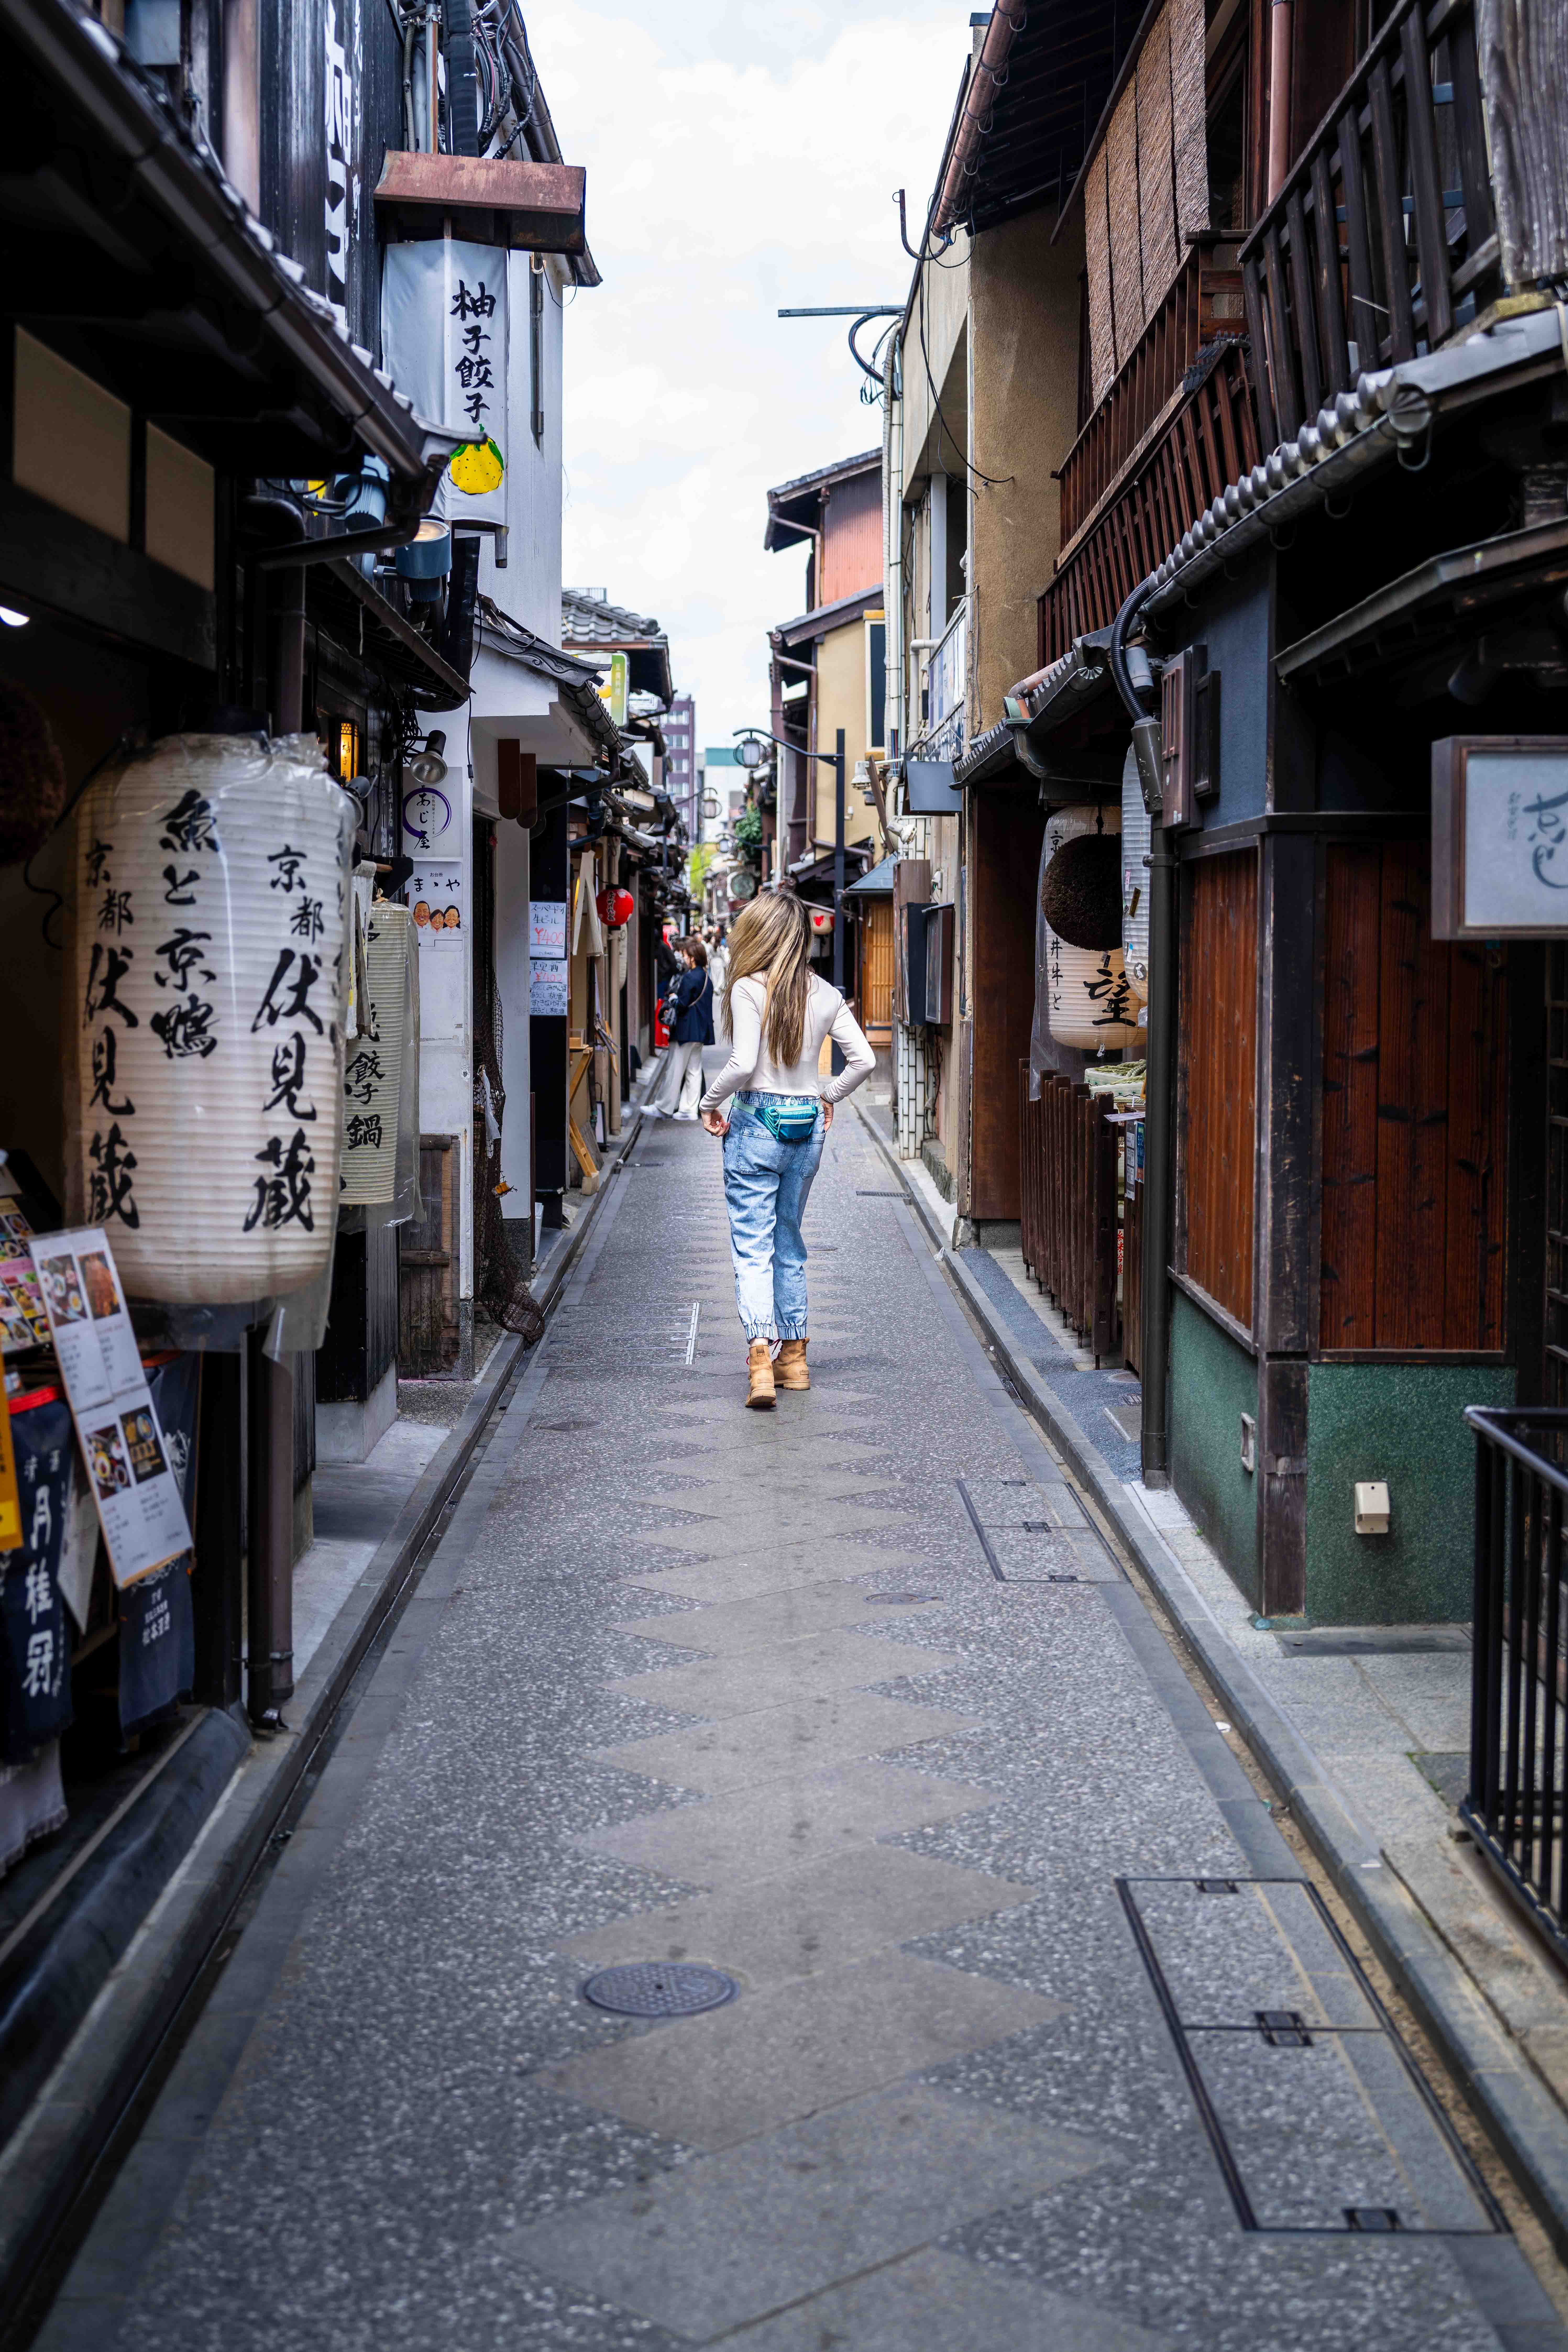 A woman walks down a tiny street in Kyoto, Japan.